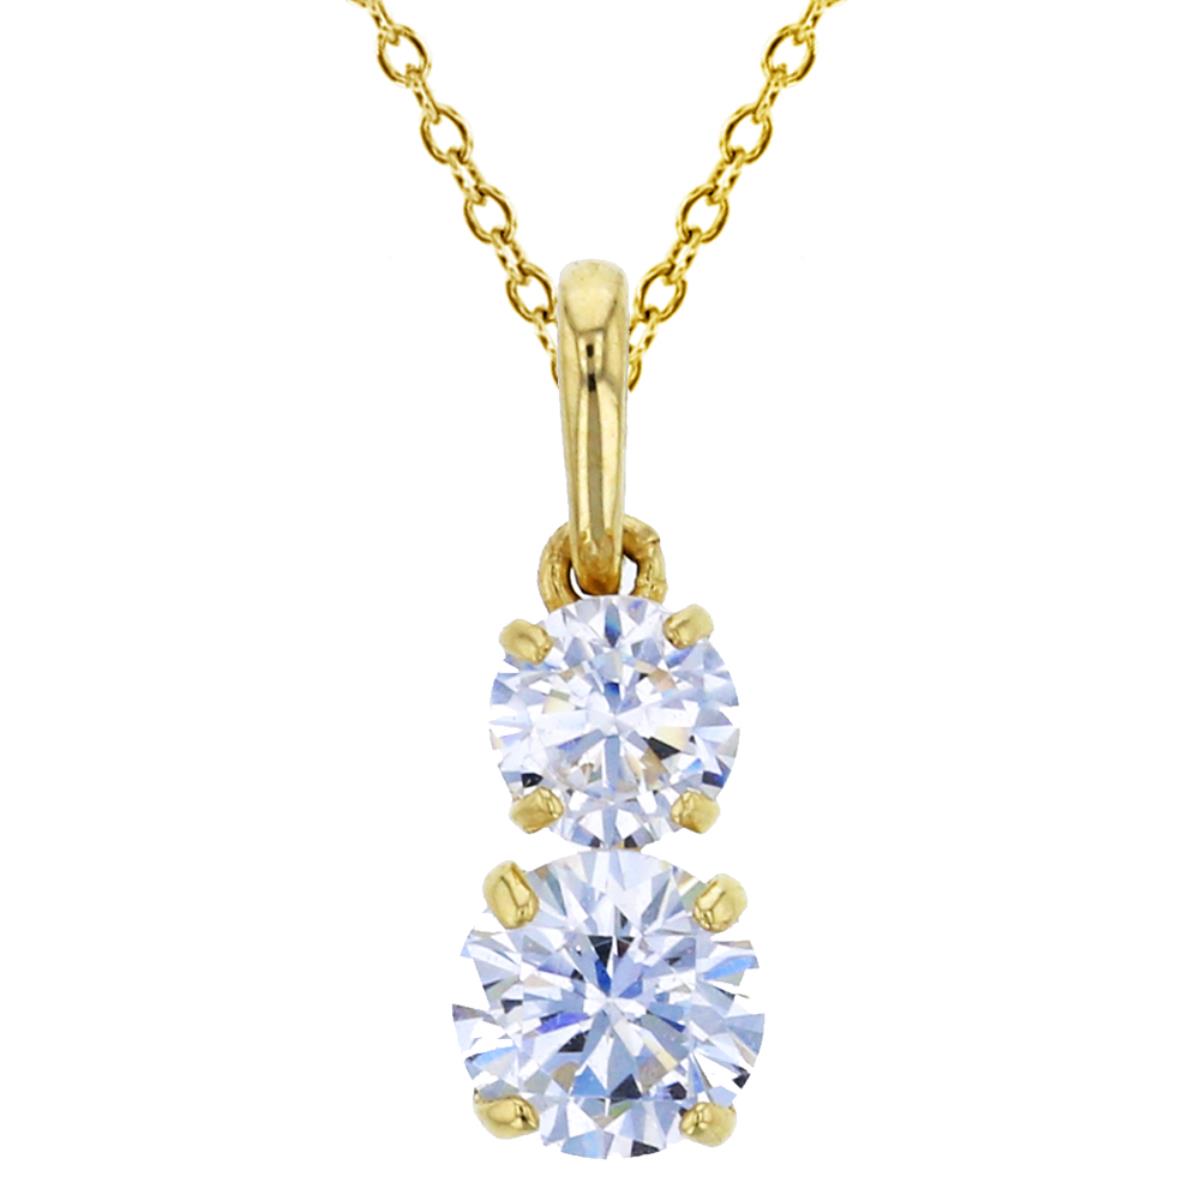 10K Yellow Gold 4mm & 5mm Round Cut 2-Stone Dangling 18" Necklace